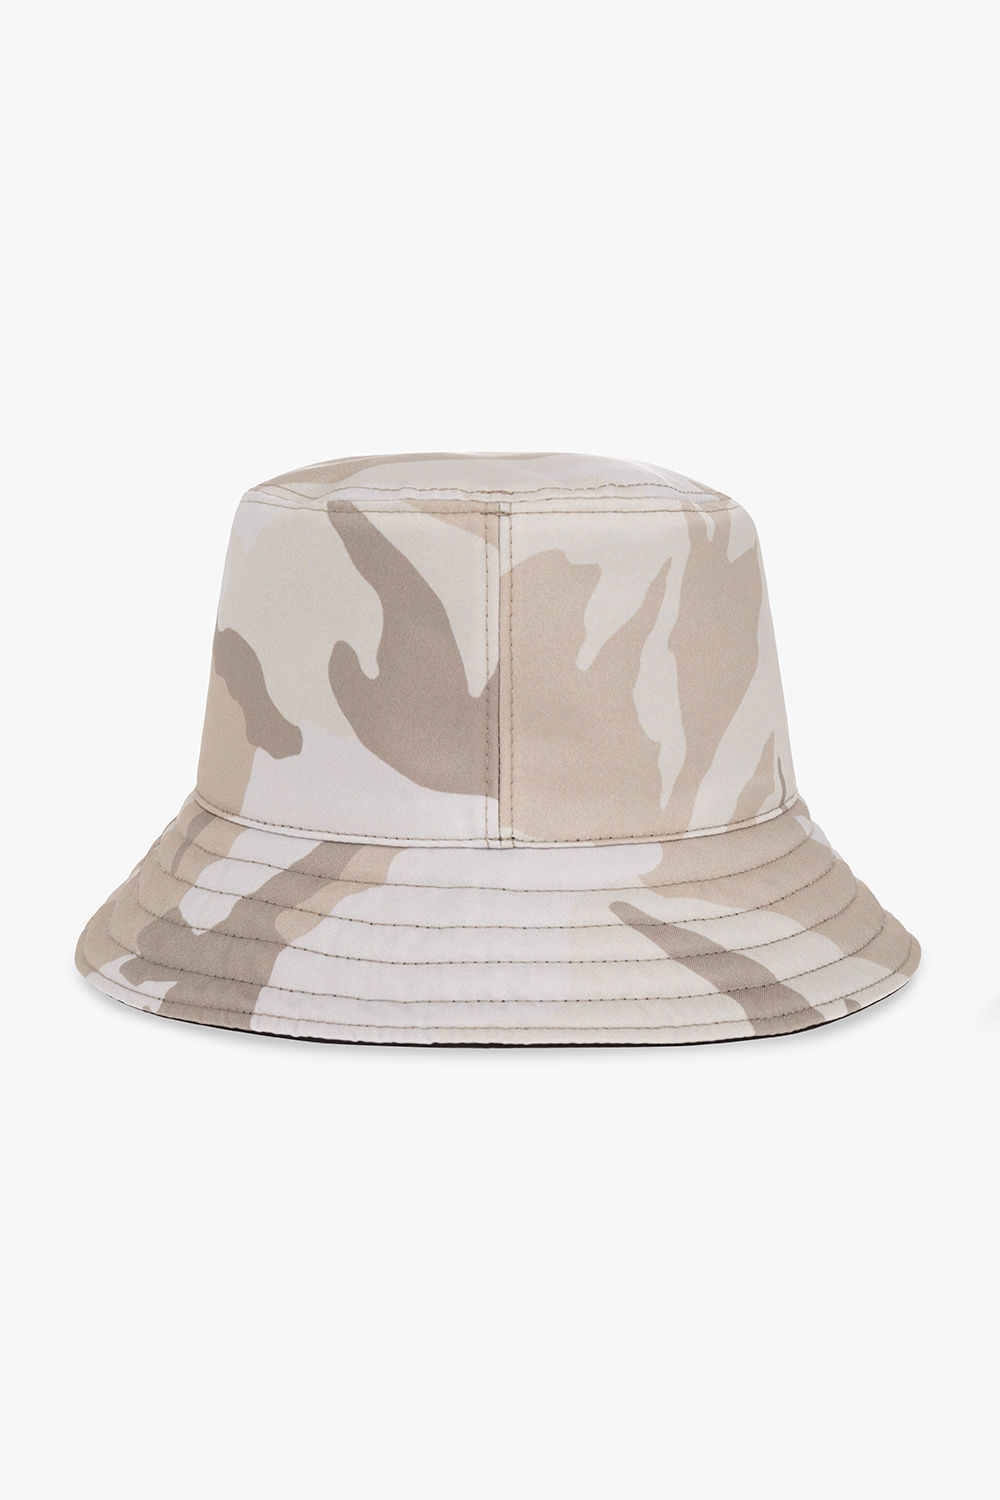 Givenchy hat Pink s usb